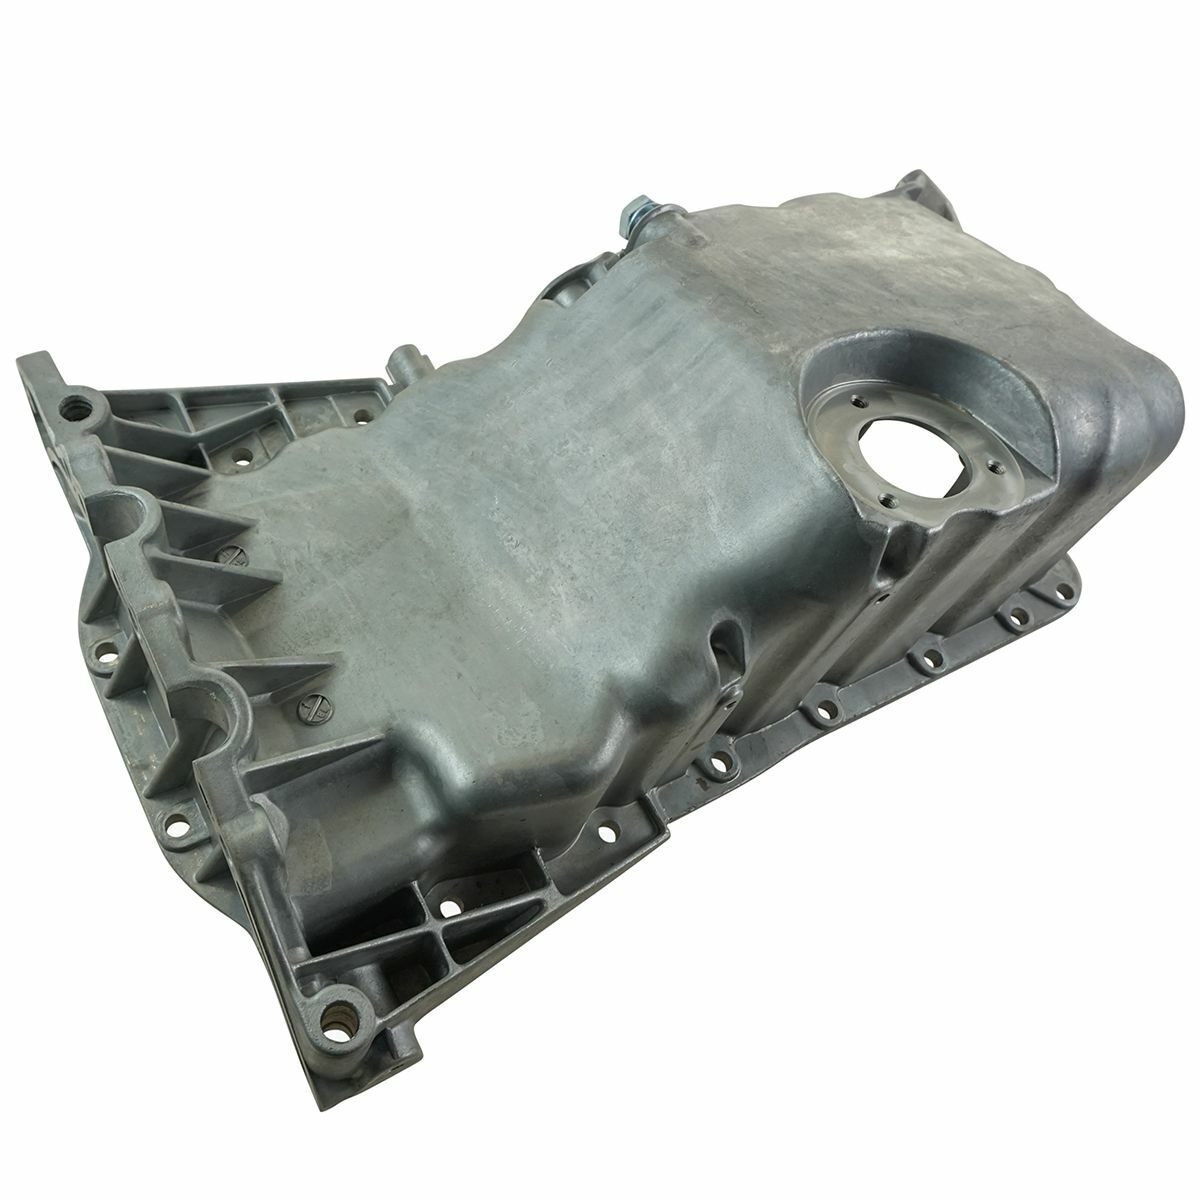 Engine Oil Pan NEW for 02-06 Audi A4 1.8L